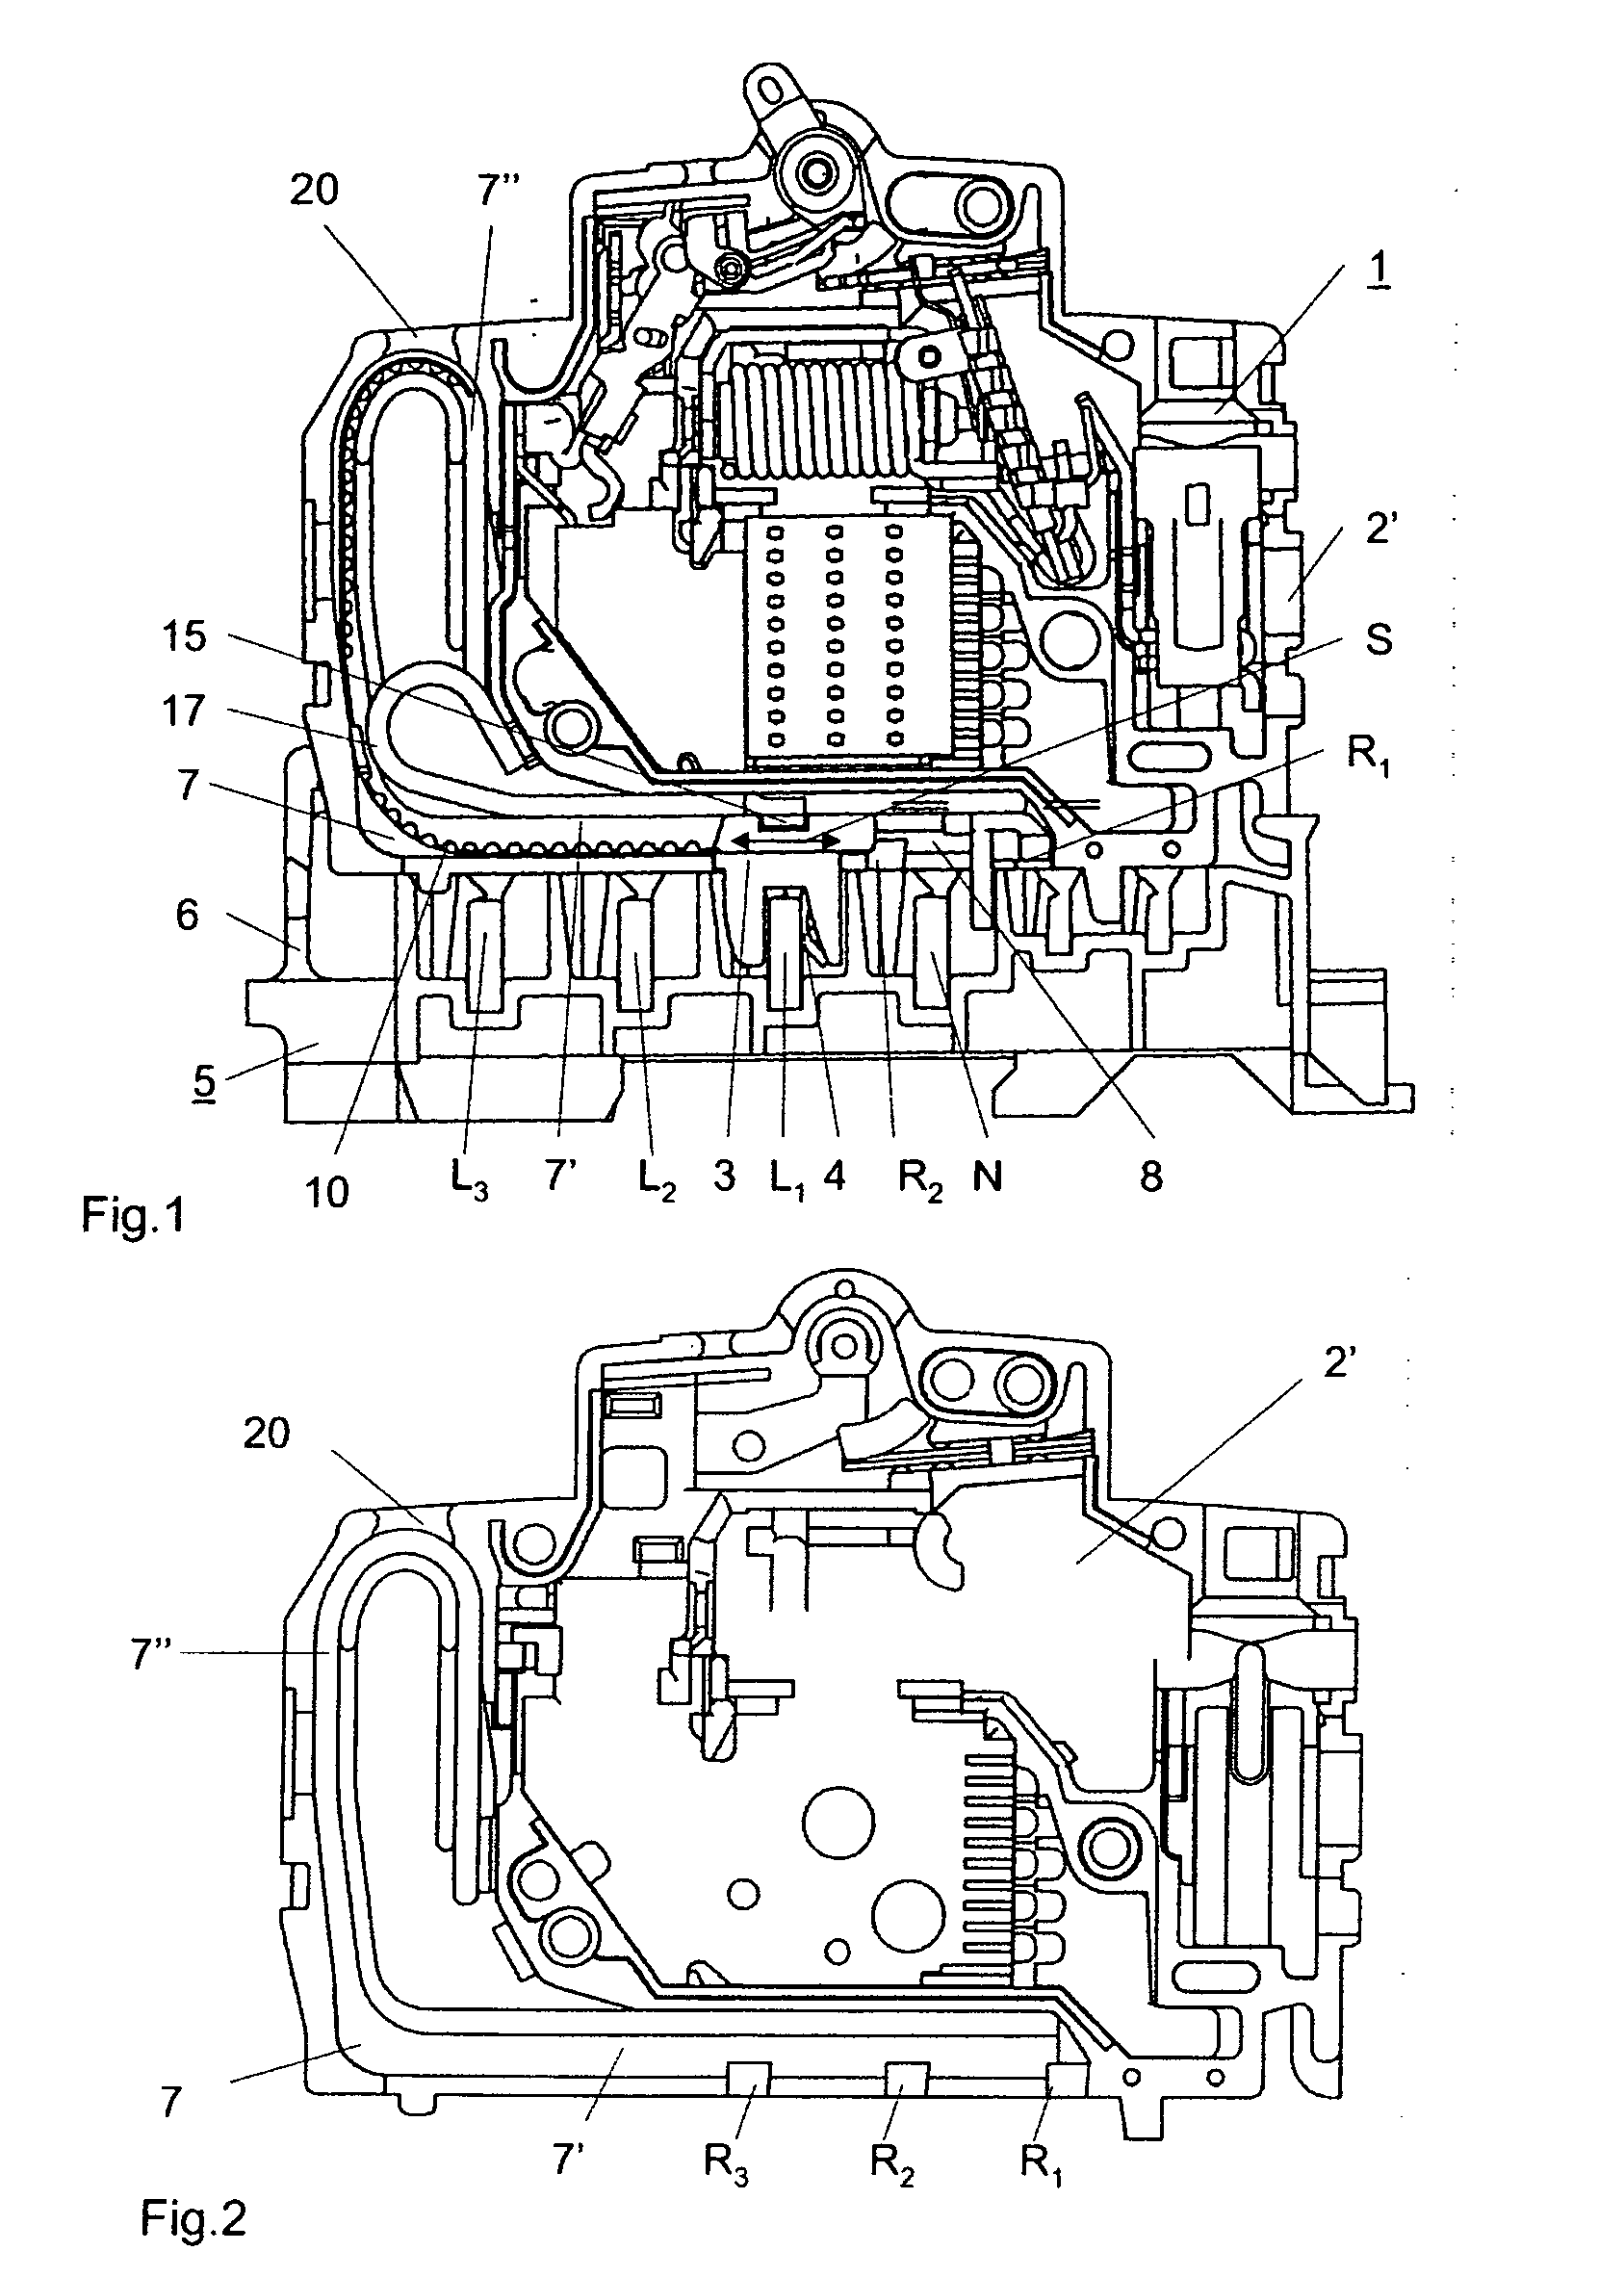 Circuit breaker with a moveable plug contact